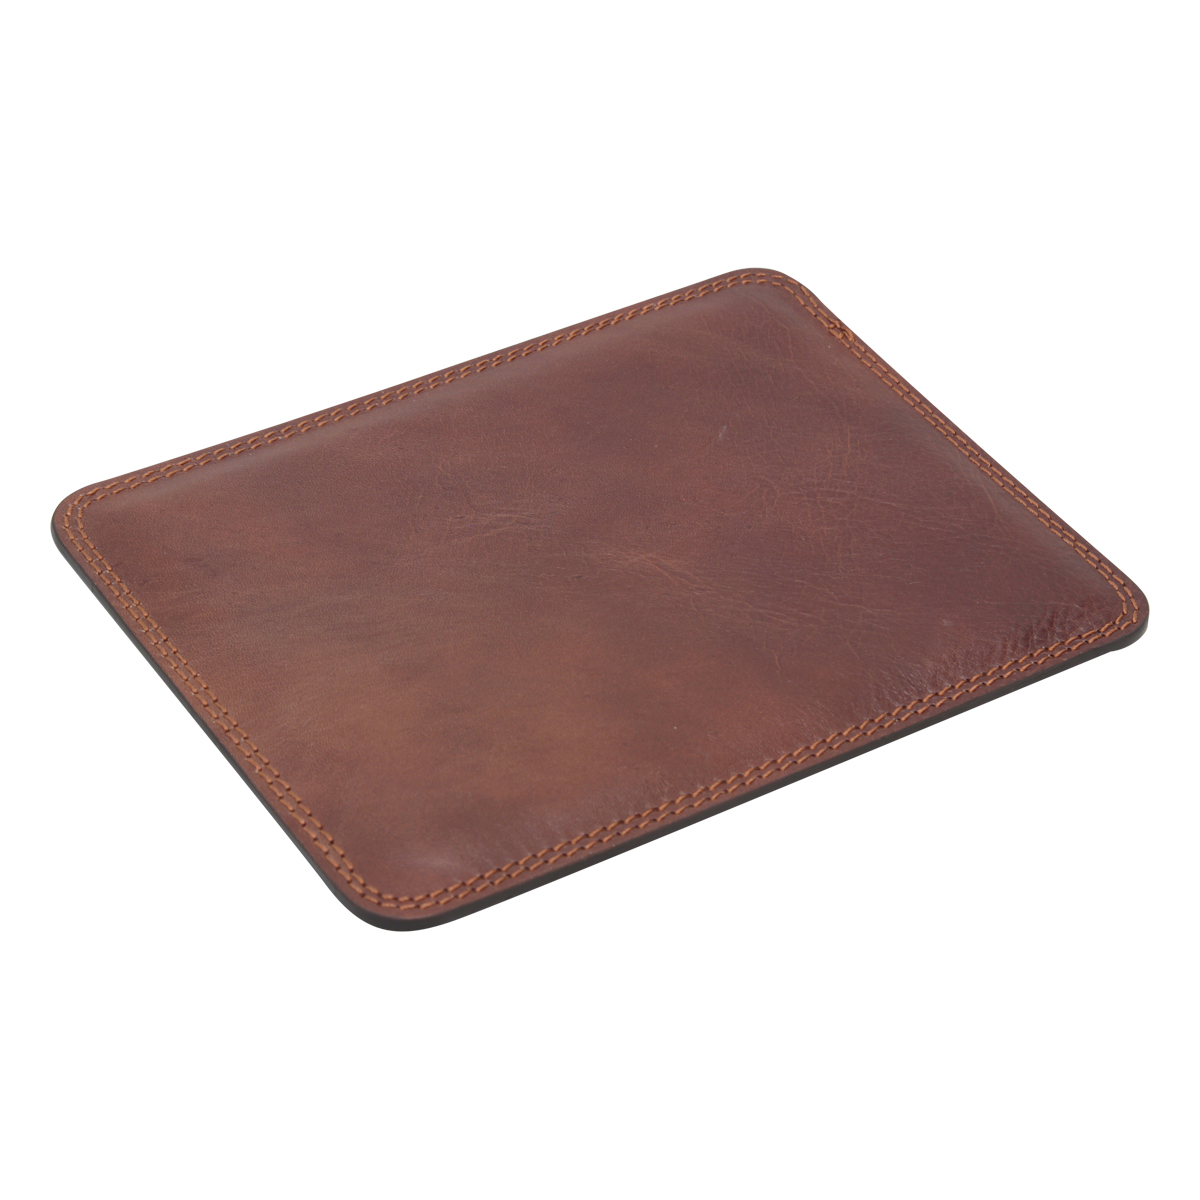 Leather mouse pad - brown | 761089MA UK | Old Angler Firenze